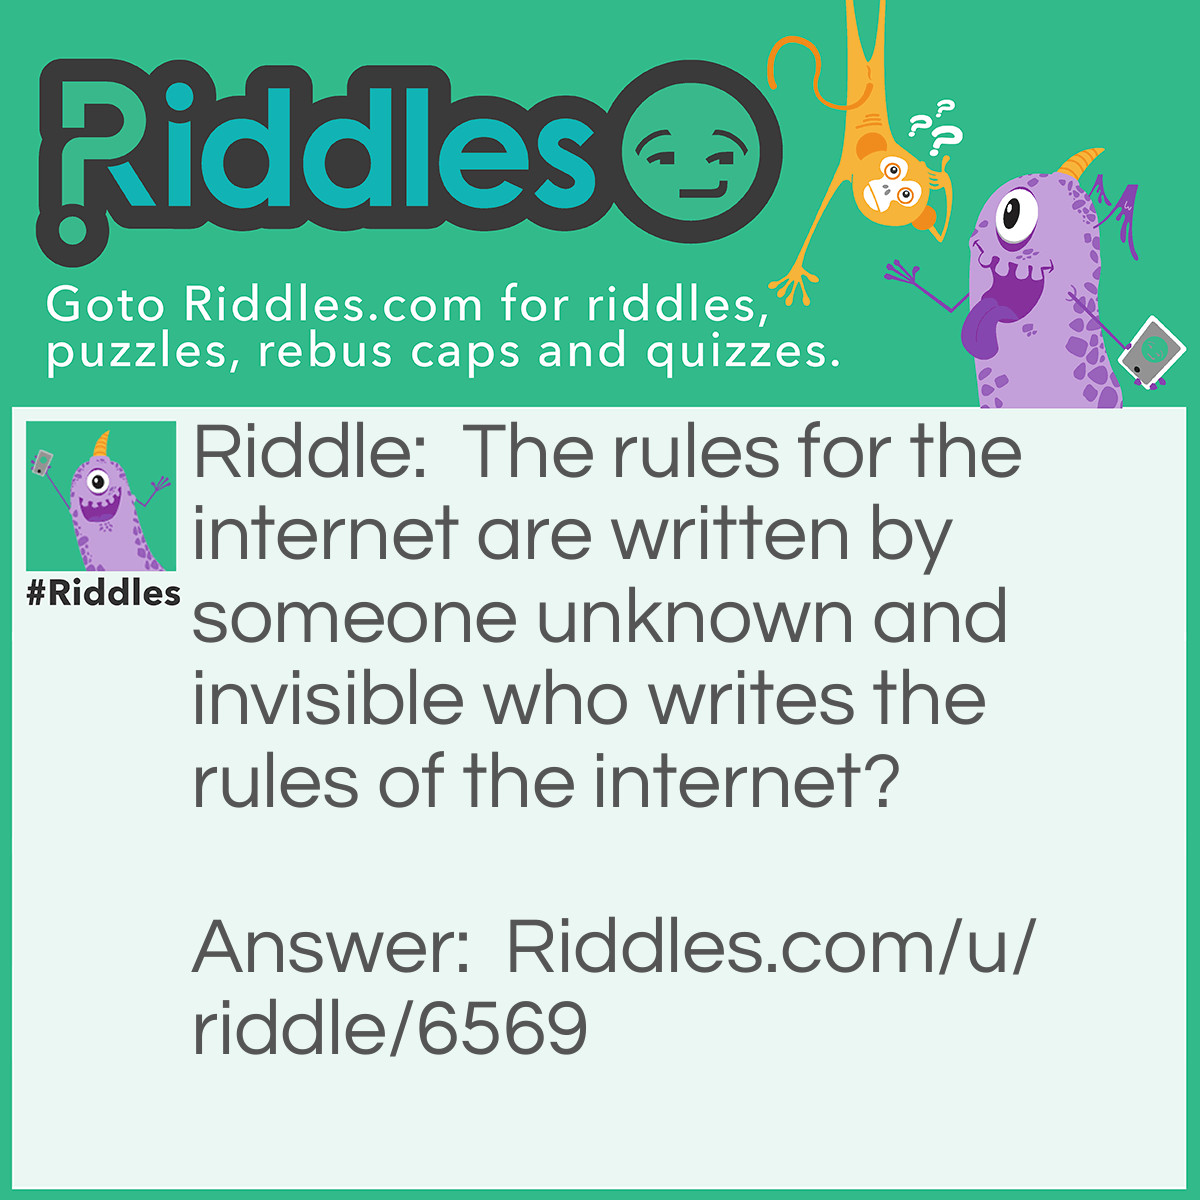 Riddle: The rules for the internet are written by someone unknown and invisible who writes the rules of the internet? Answer: No one